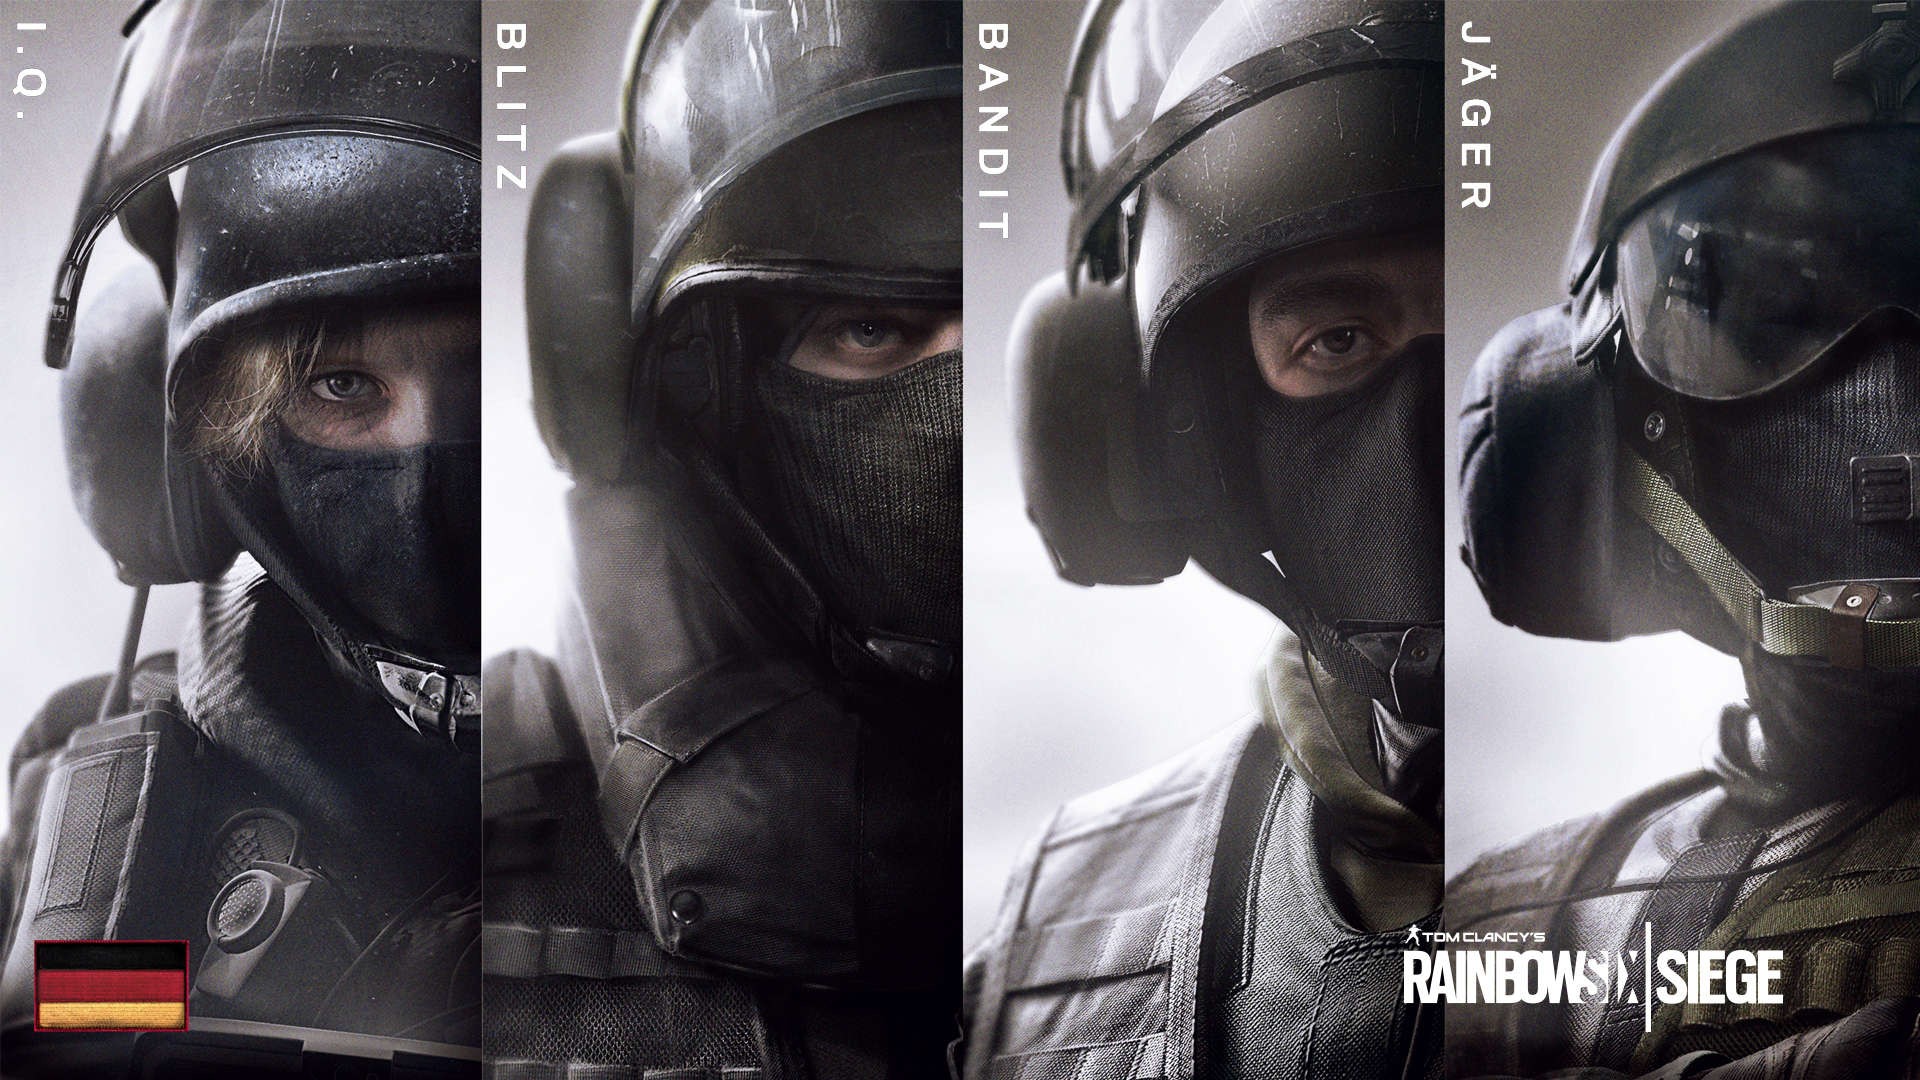 General 1920x1080 Rainbow Six: Siege Tom Clancy's Ubisoft video games Rainbow Six German Army PC gaming special forces collage GSG 9 video game art